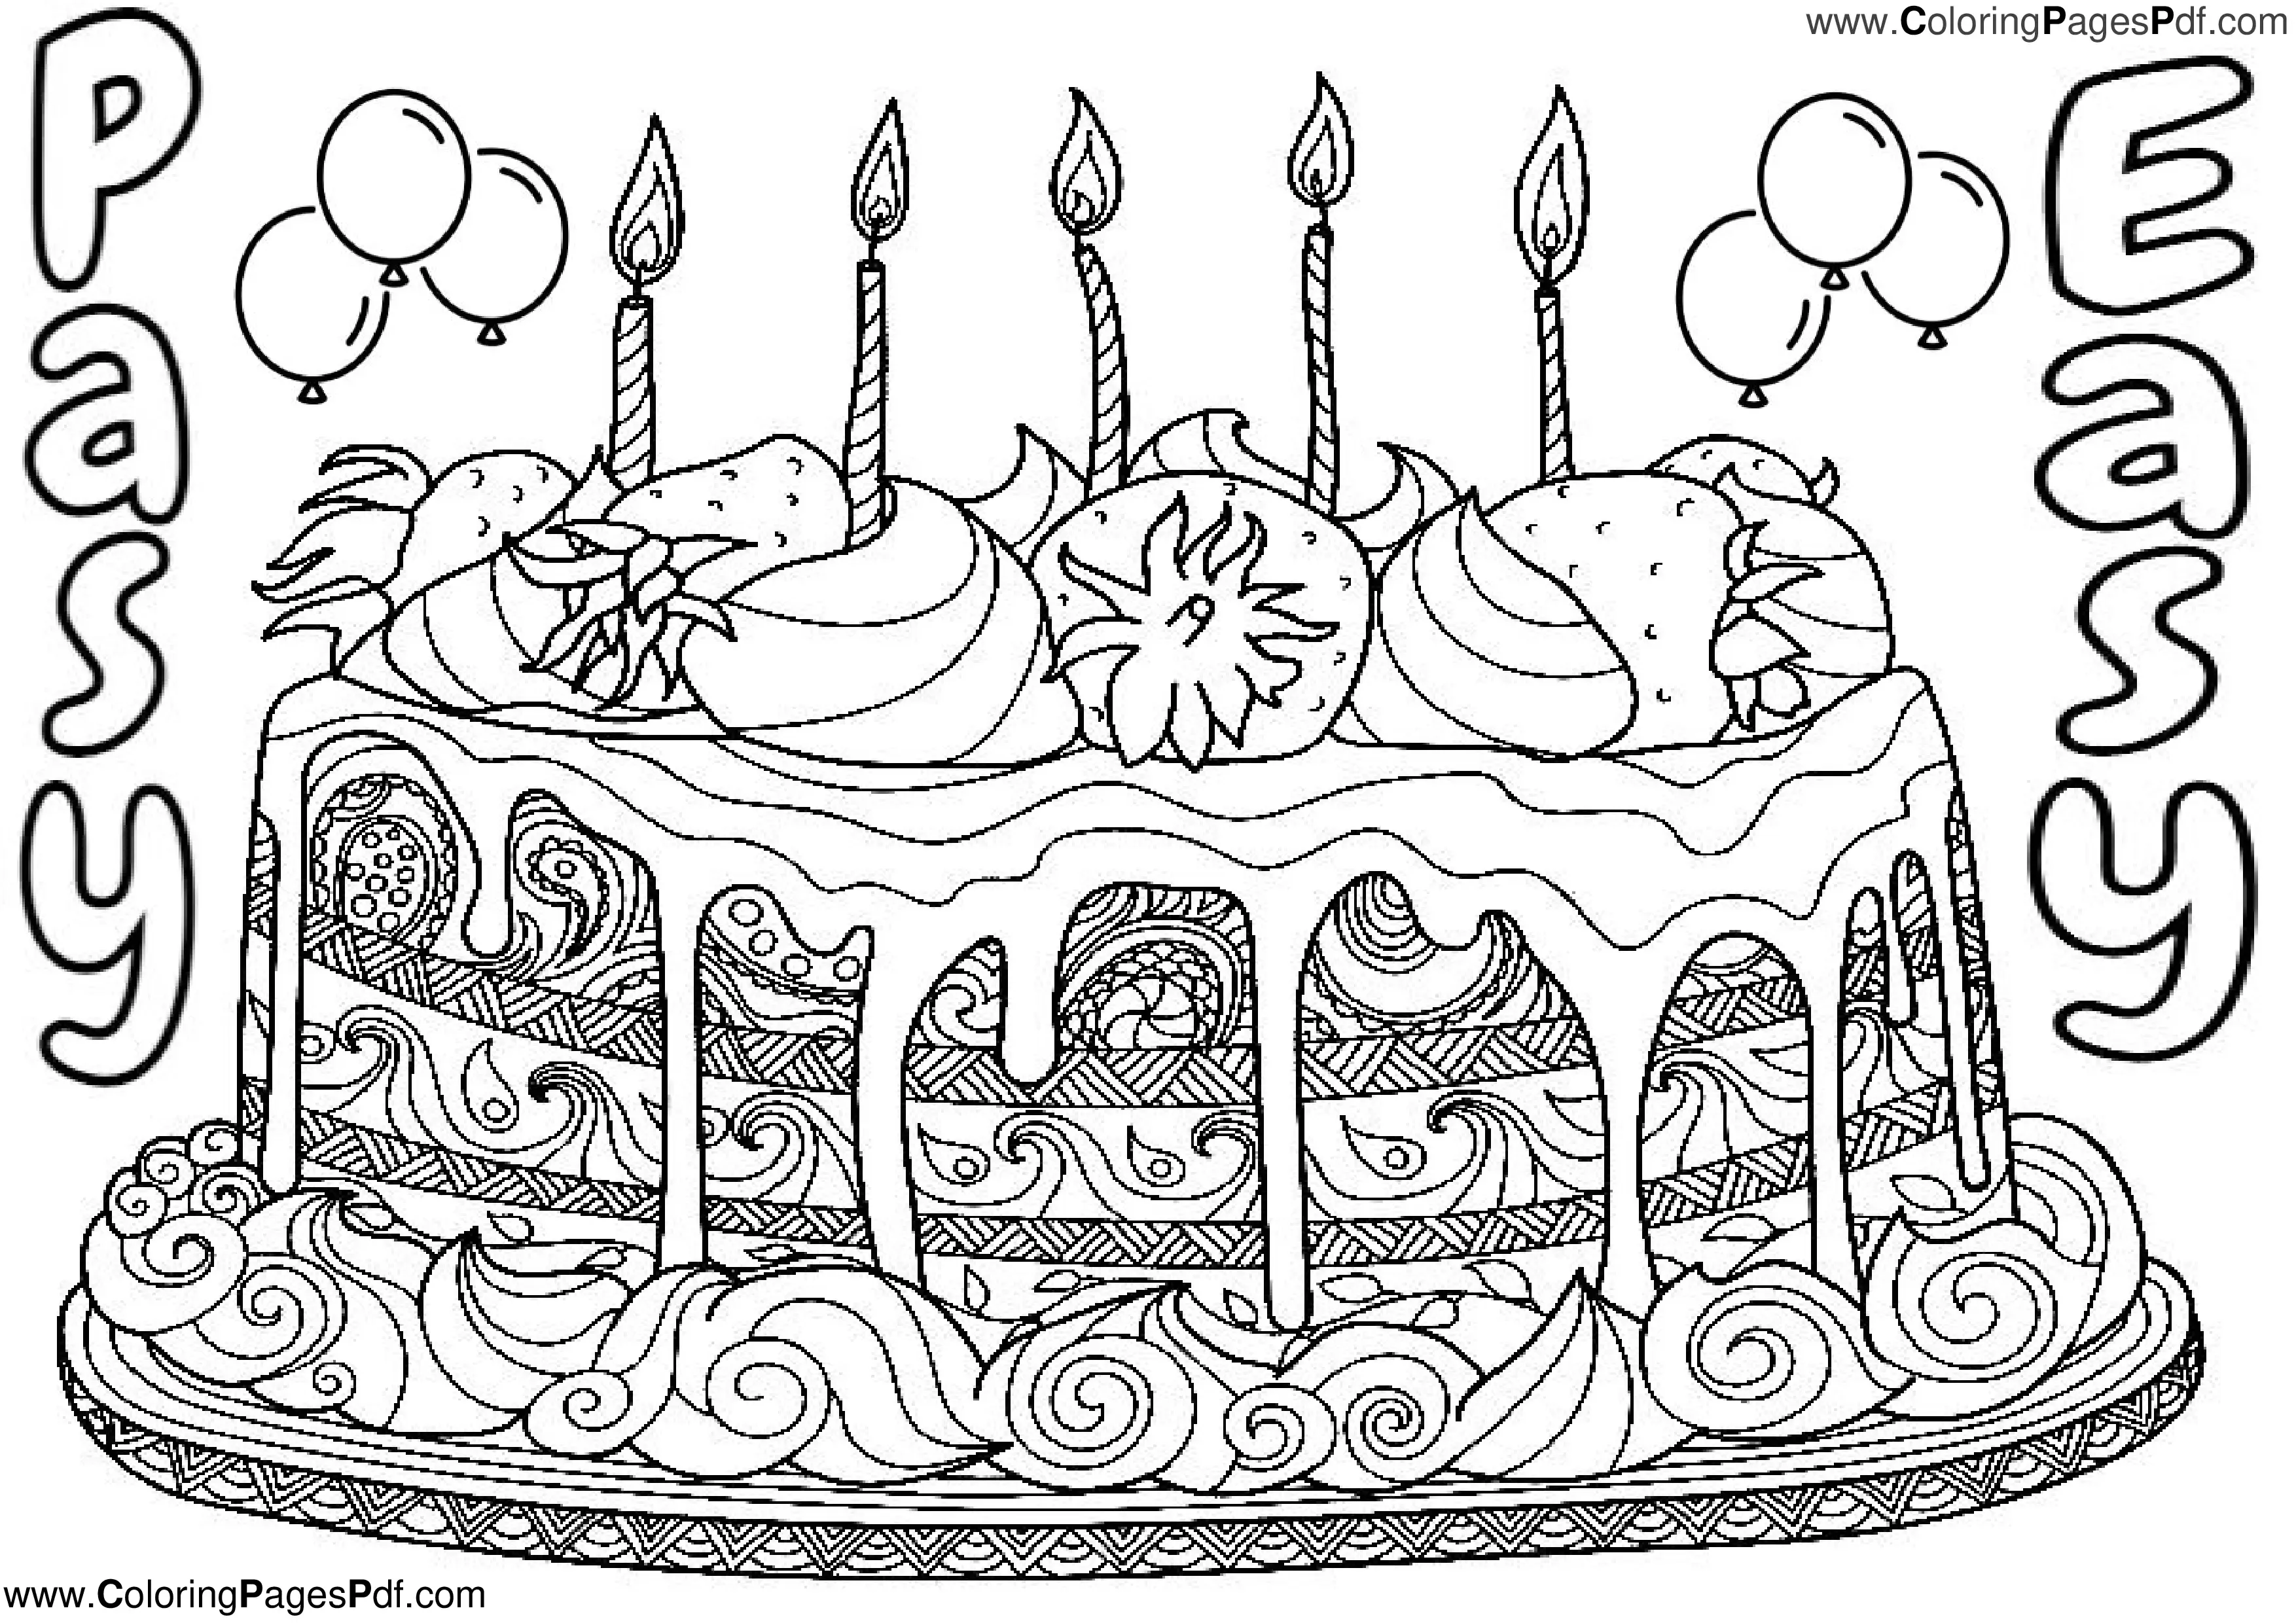 Easy cake coloring pages